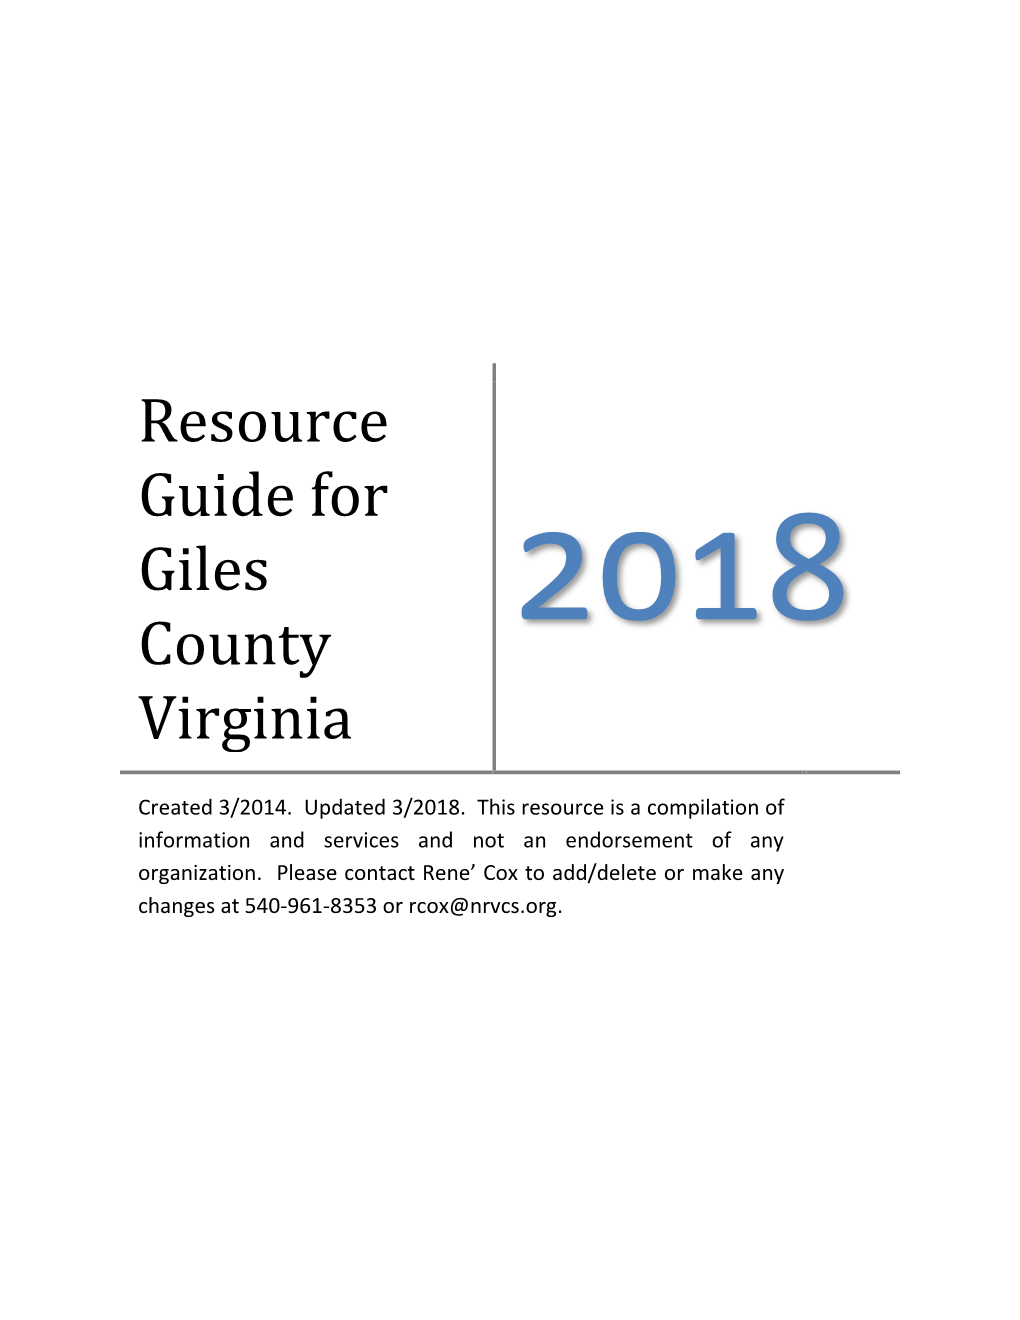 Resource Guide for Giles County Virginia